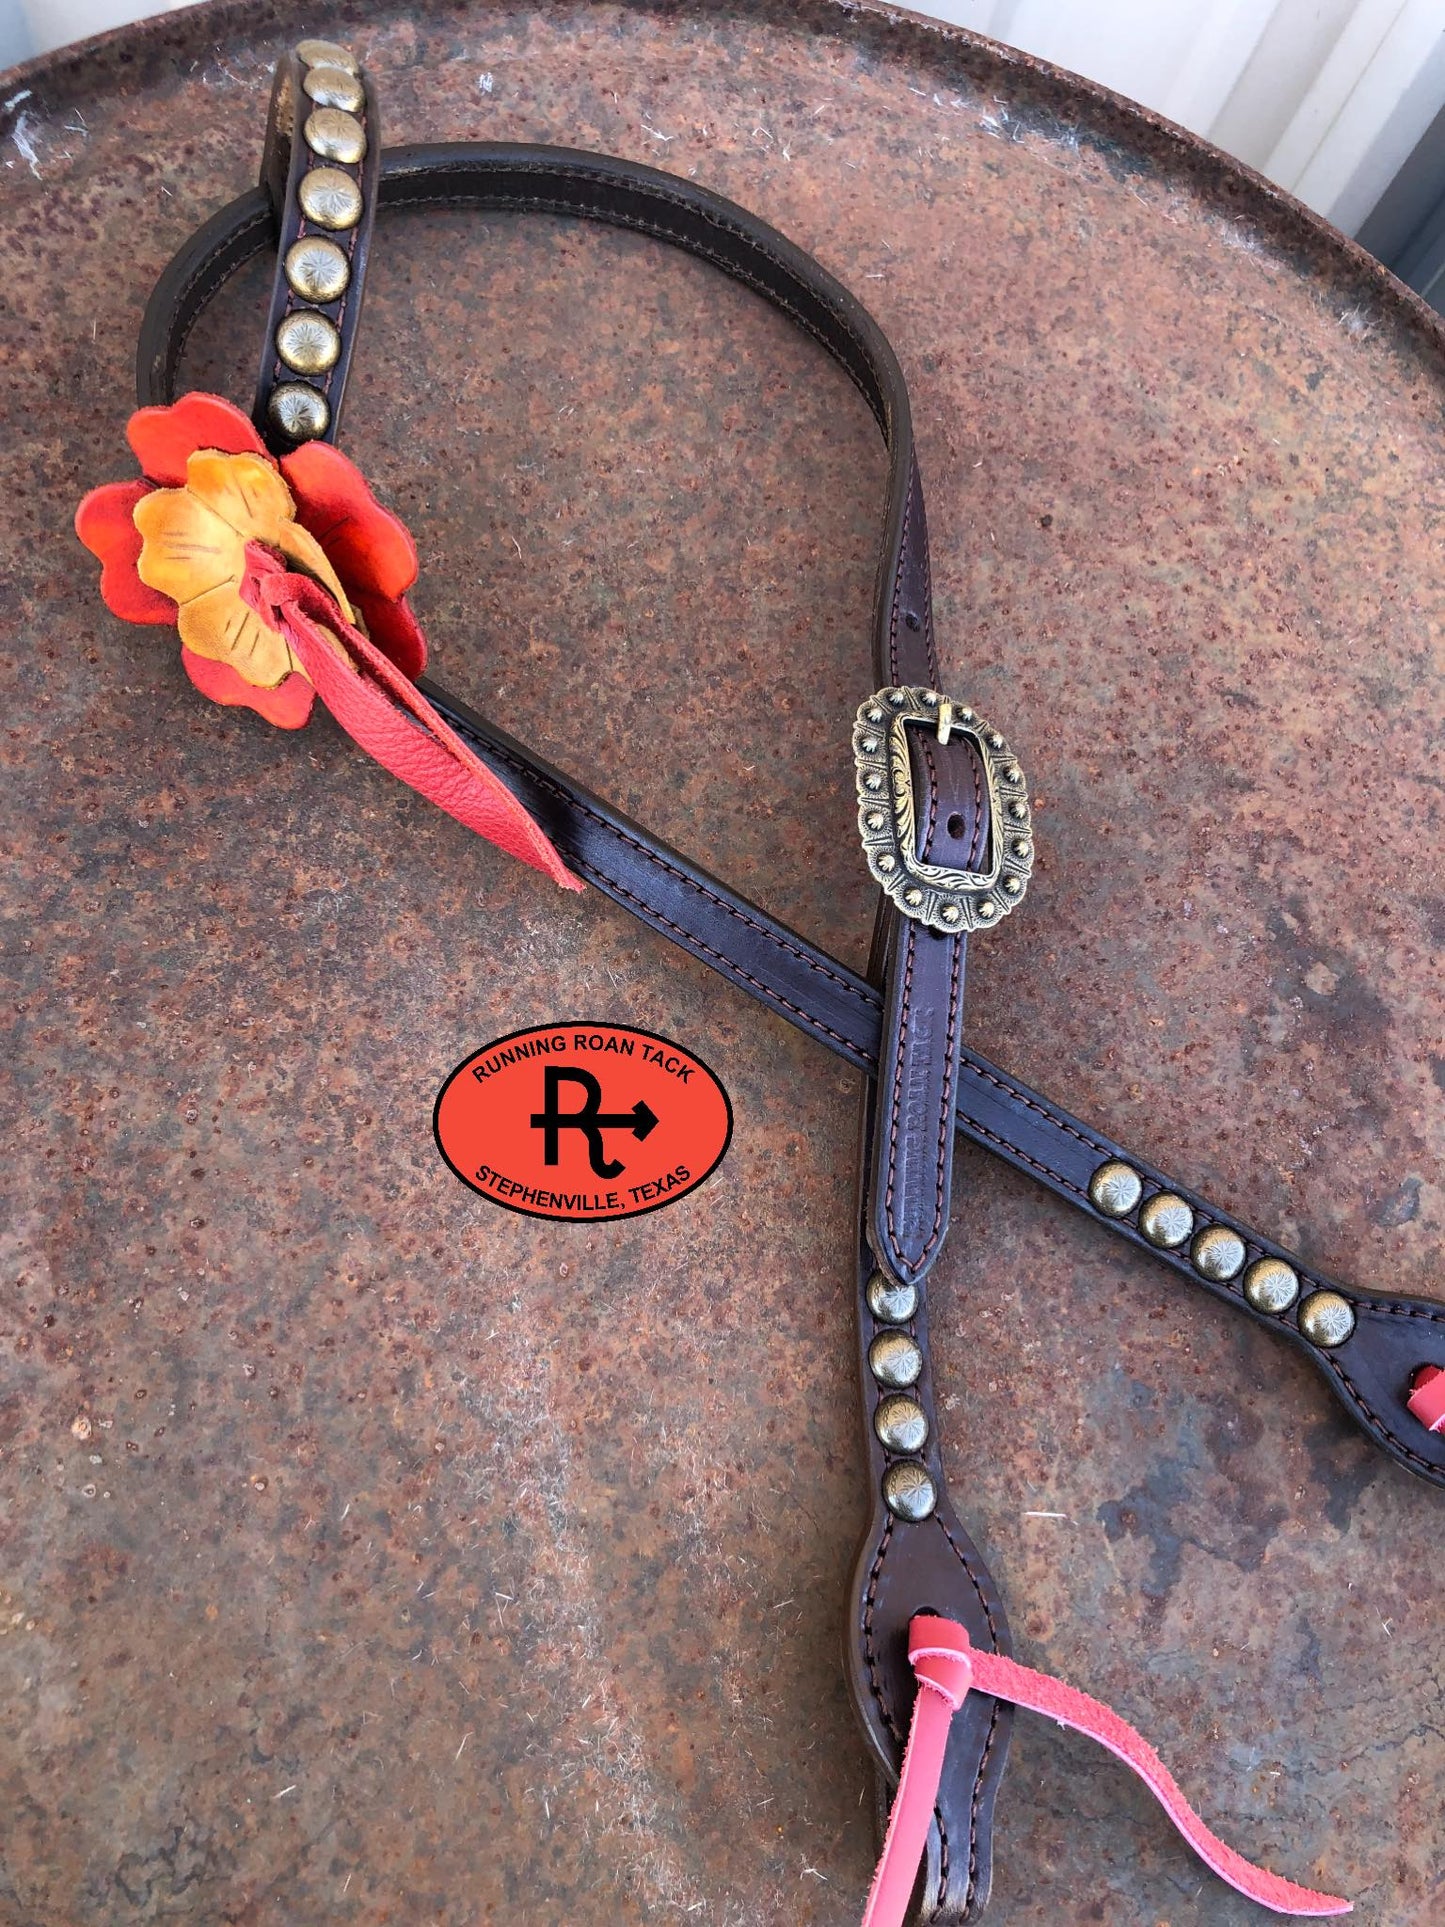 Yuma Single Ear Standard Size Headstall Hand Dyed Leather Flowers in Your Choice of Colors